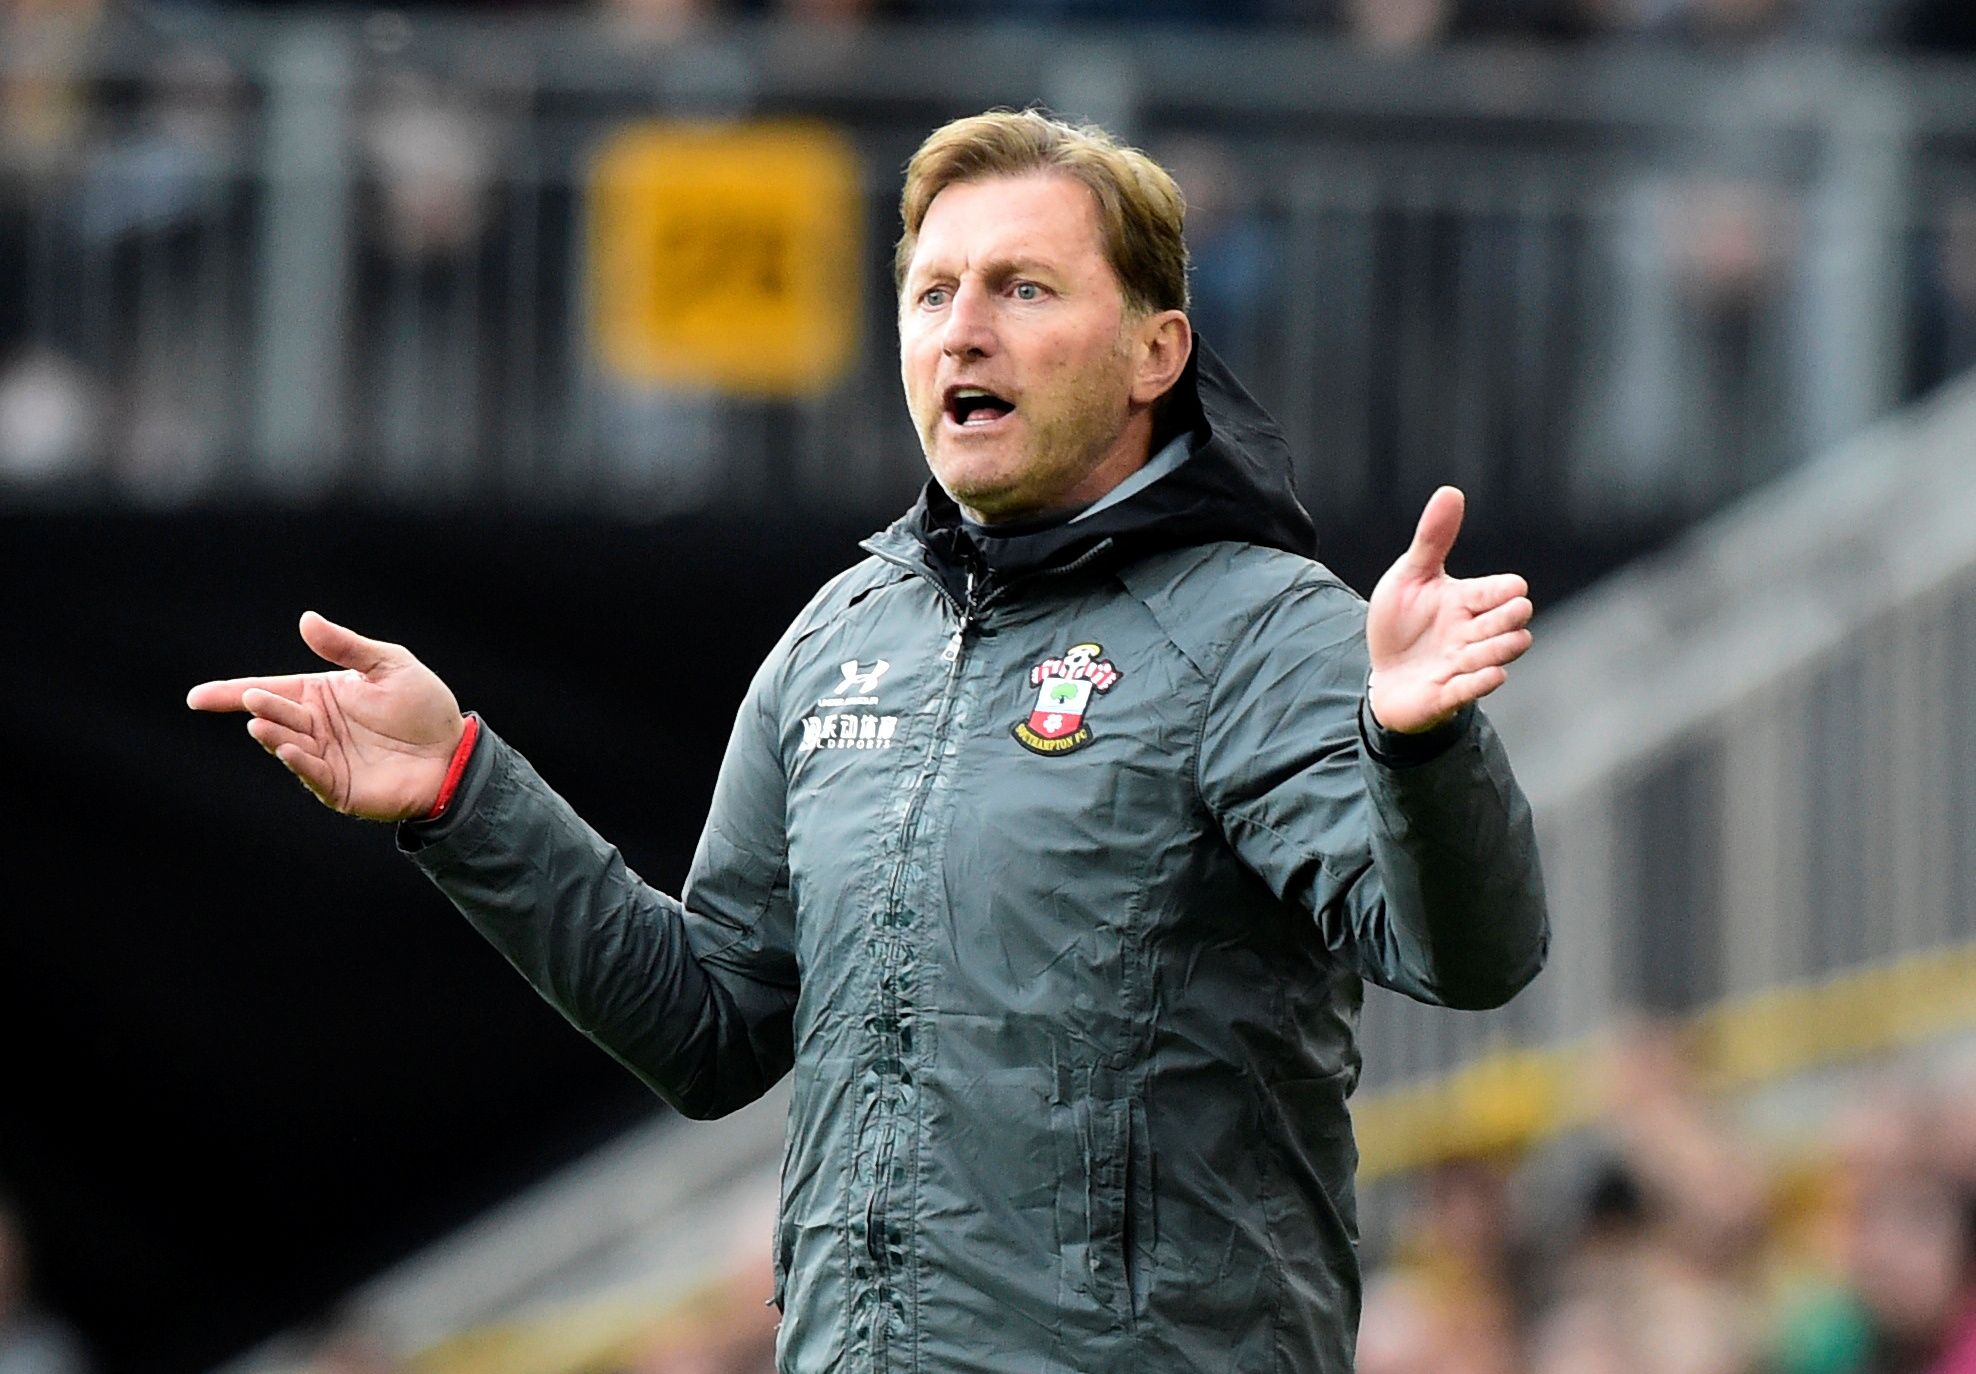 Soccer Football - Premier League - Wolverhampton Wanderers v Southampton - Molineux Stadium, Wolverhampton, Britain - October 19, 2019  Southampton manager Ralph Hasenhuttl reacts   REUTERS/Rebecca Naden  EDITORIAL USE ONLY. No use with unauthorized audio, video, data, fixture lists, club/league logos or "live" services. Online in-match use limited to 75 images, no video emulation. No use in betting, games or single club/league/player publications.  Please contact your account representative for